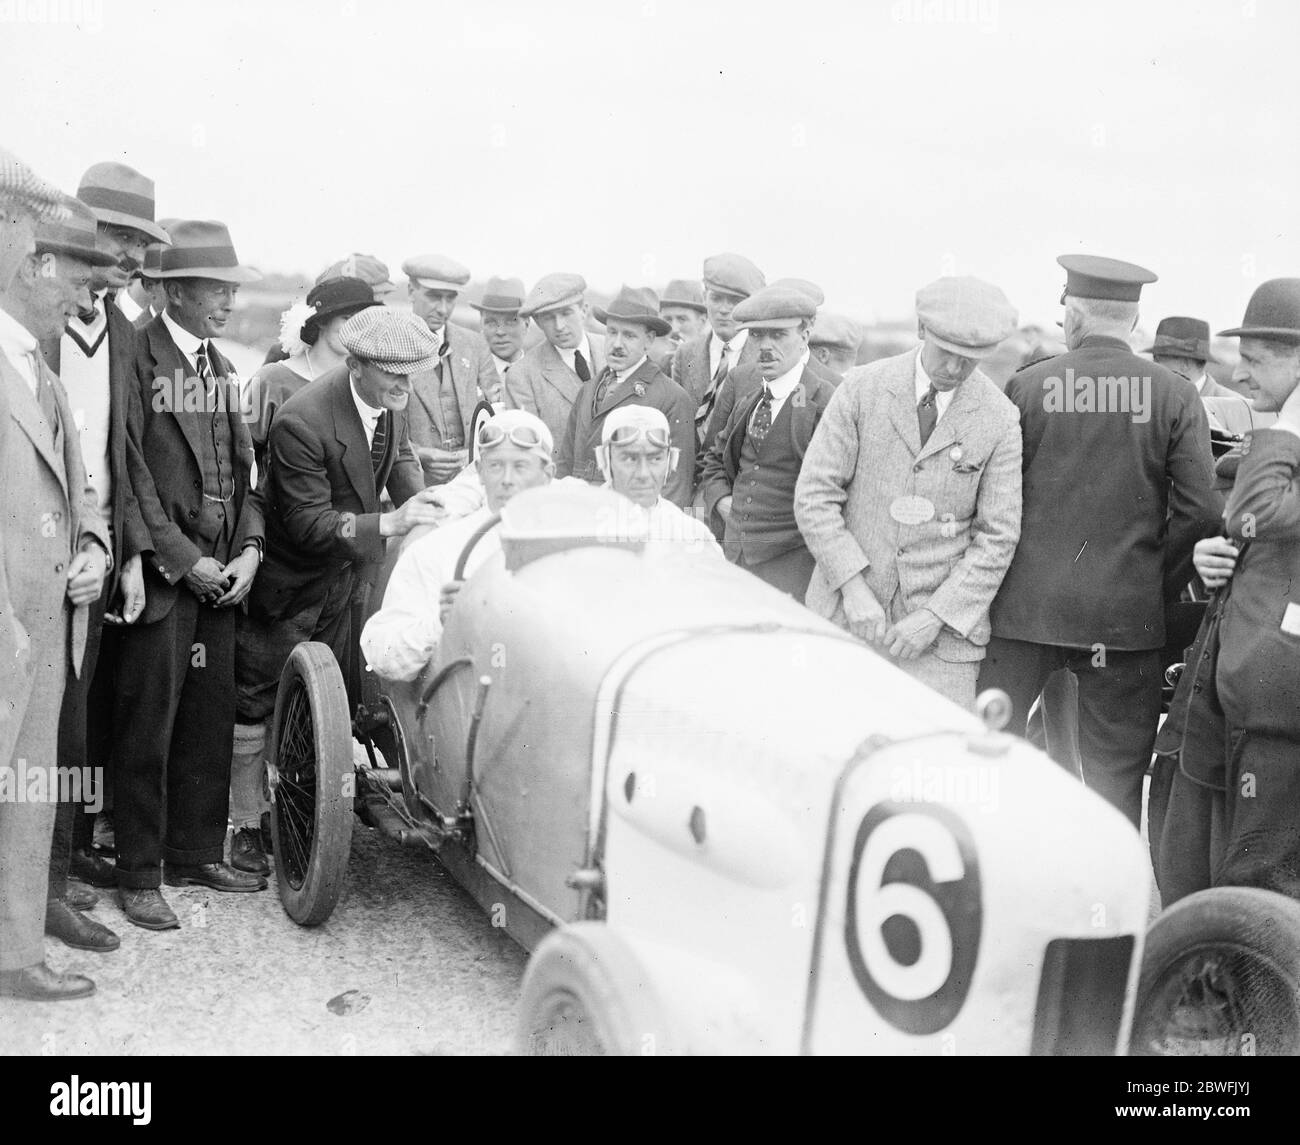 200 minles Race at Brooklands At Brooklands near Weybridge in Surrey, England ,on Saturday the race for cars up to 1 500 cc was won by Mr K Lee Guiness on a Talbot Darracq . seen here with his mechanic straight after the race 19 August 1922 Stock Photo